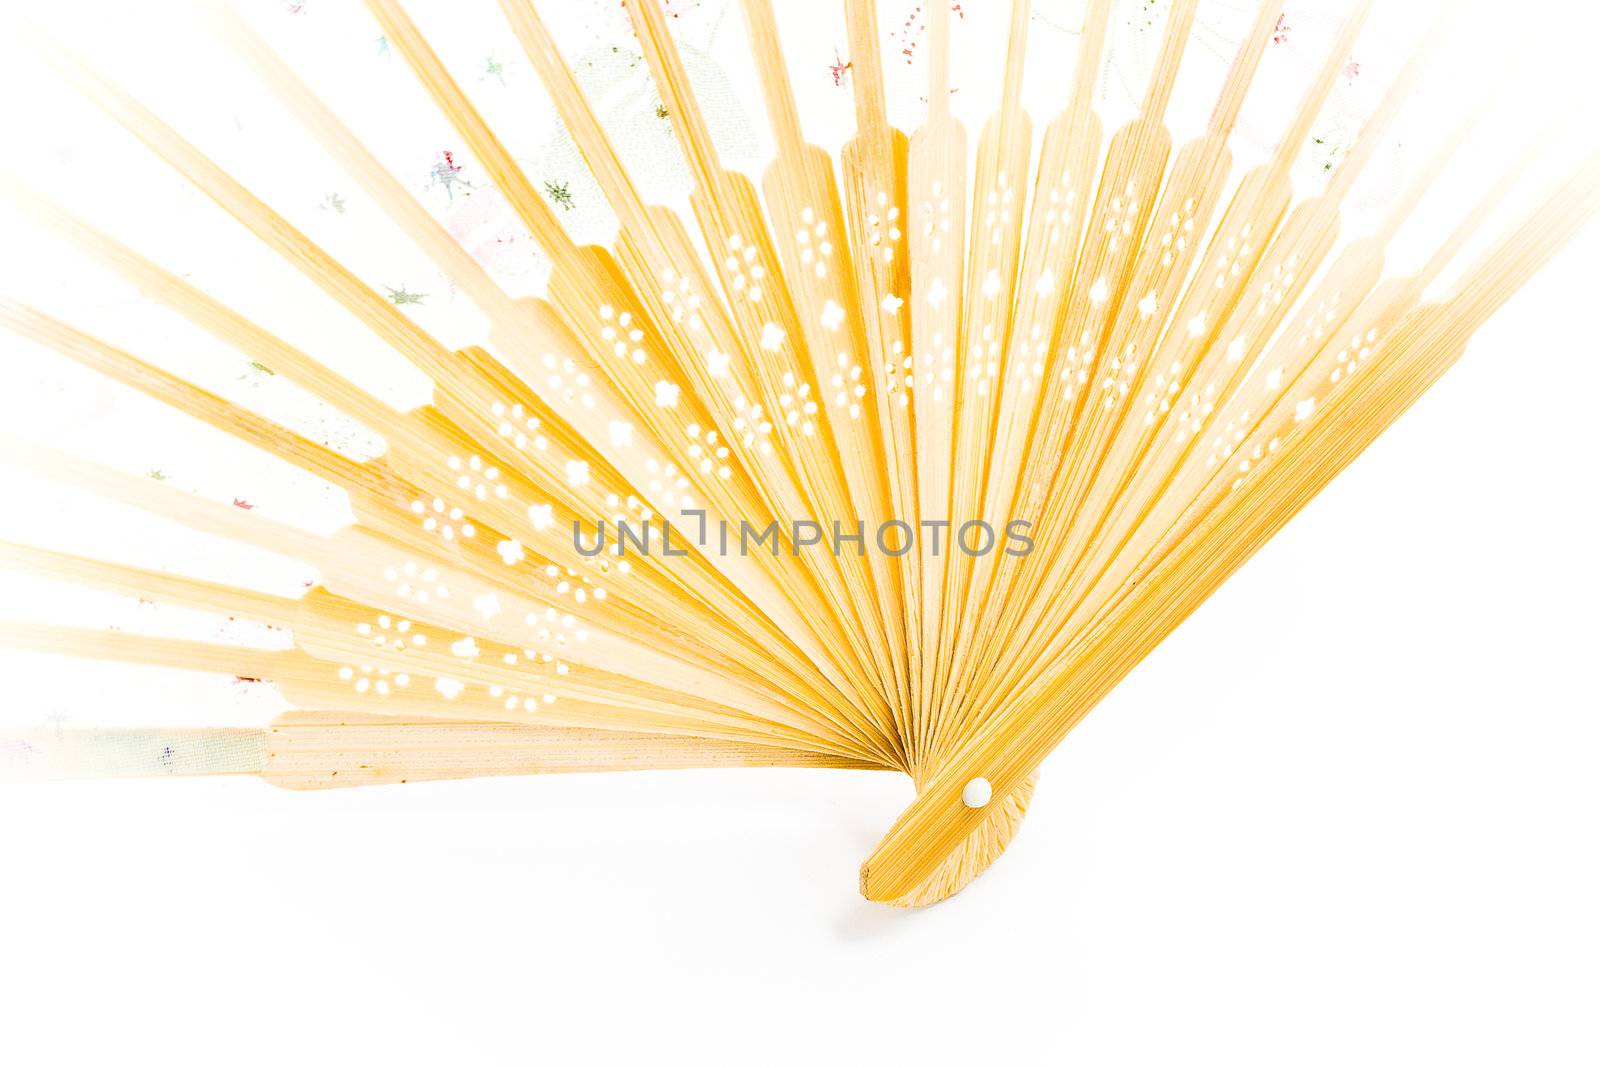 China hand fan isolated on white